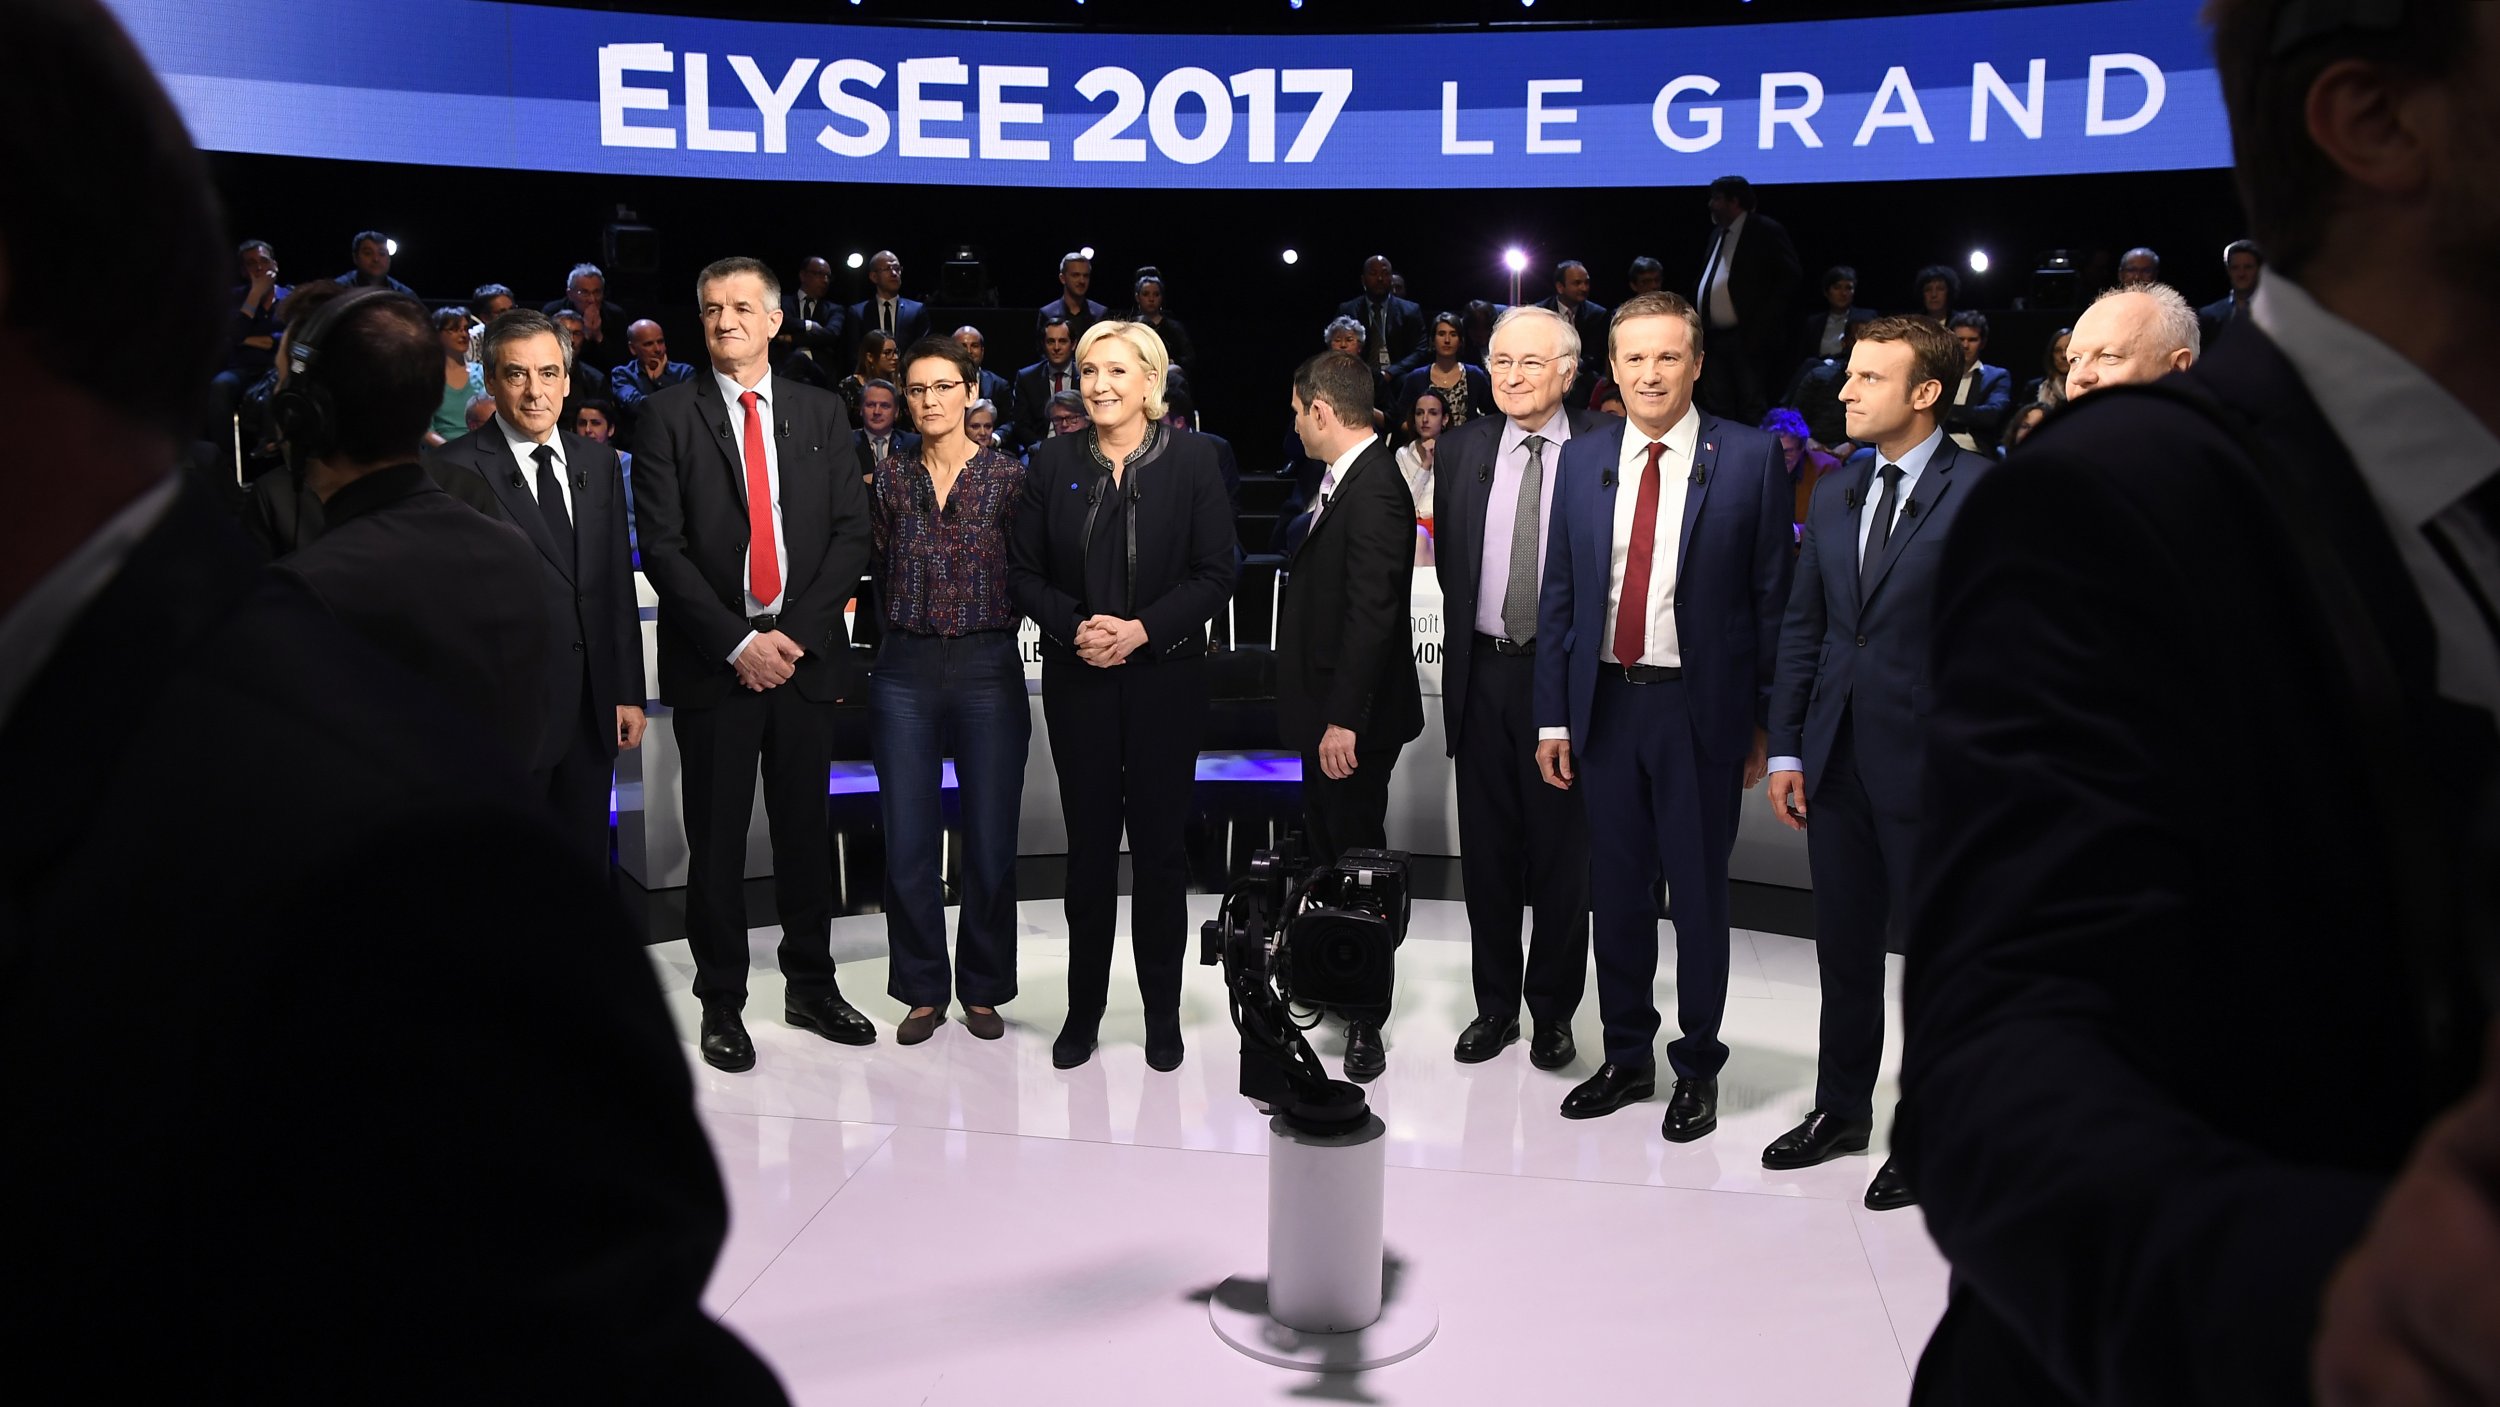 Macron Le Pen Clash In Heated French TV Debate Weeks Before The Election